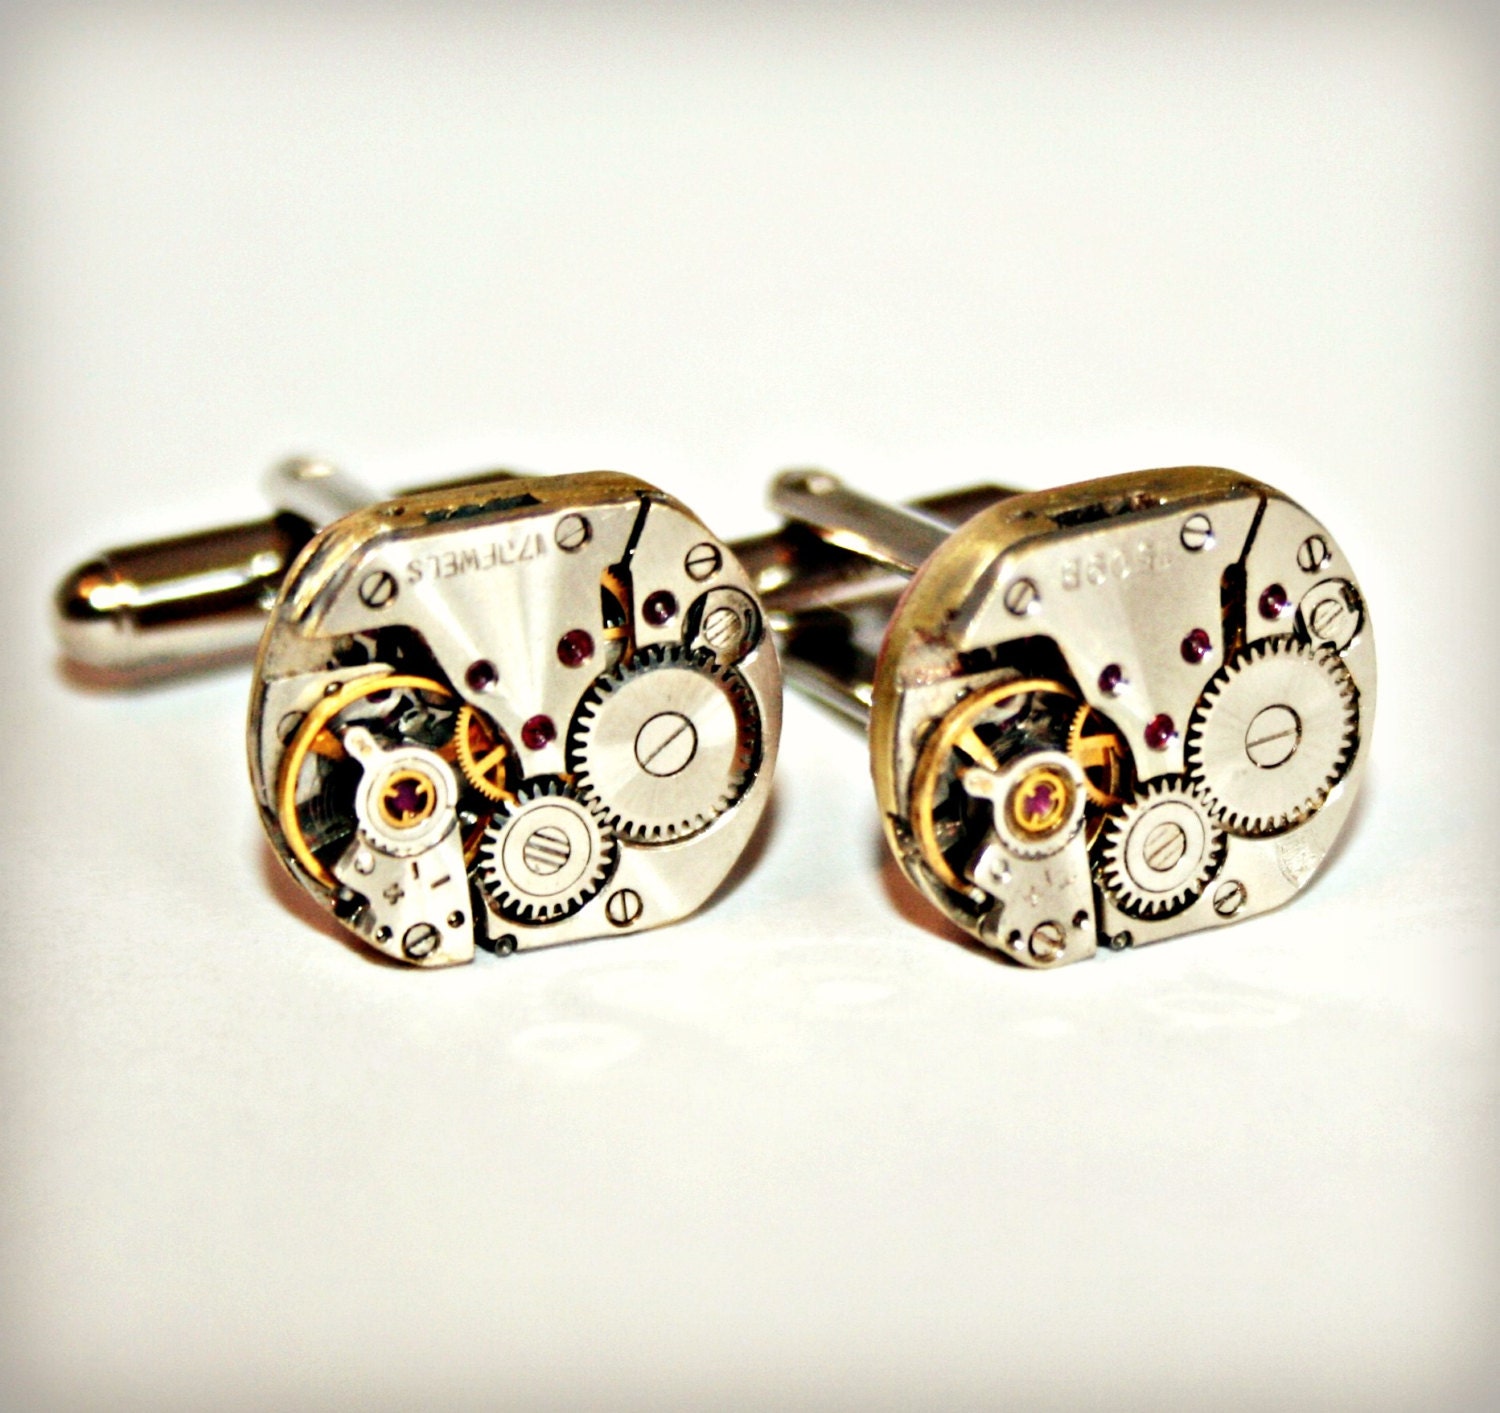 STEAMPUNK CUFFLINKS with Vintage Watch Movements - Great Gift for Father's Day, Birthday, Anniversary, Graduation